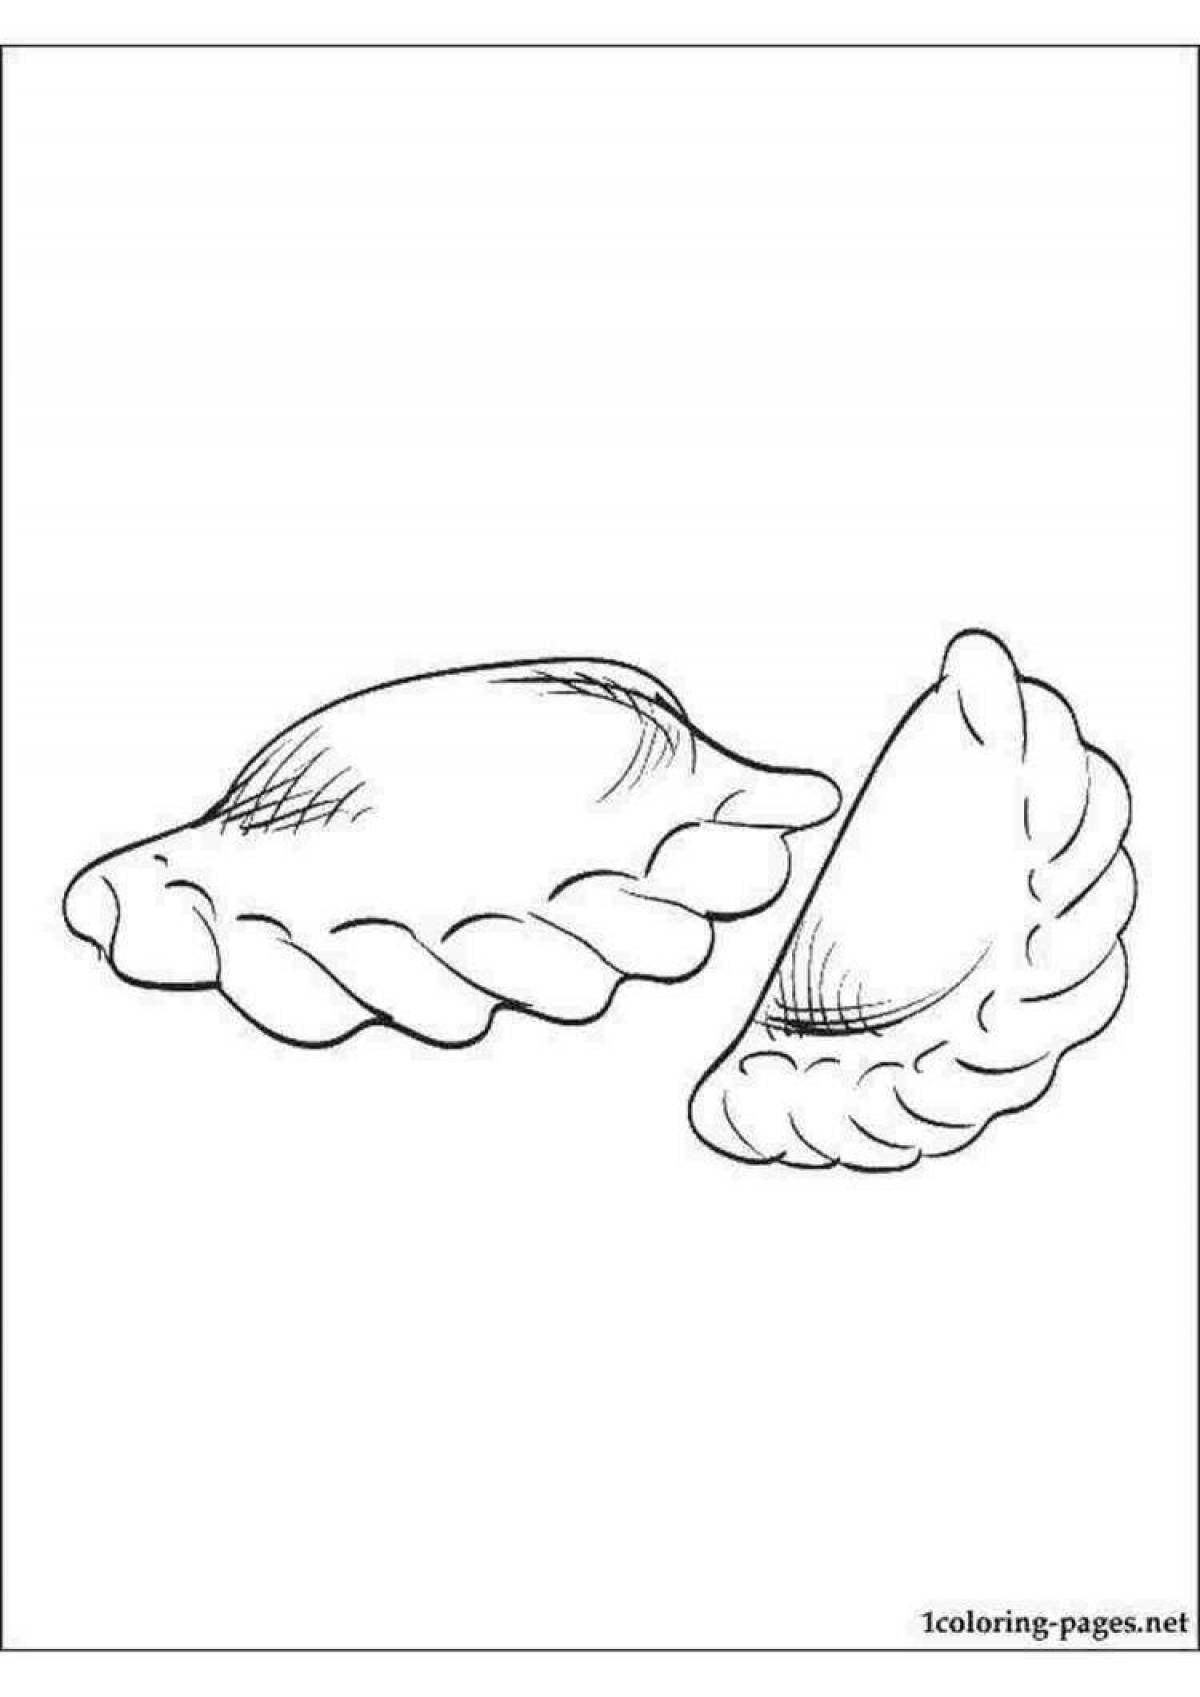 Children's Pie Coloring Page